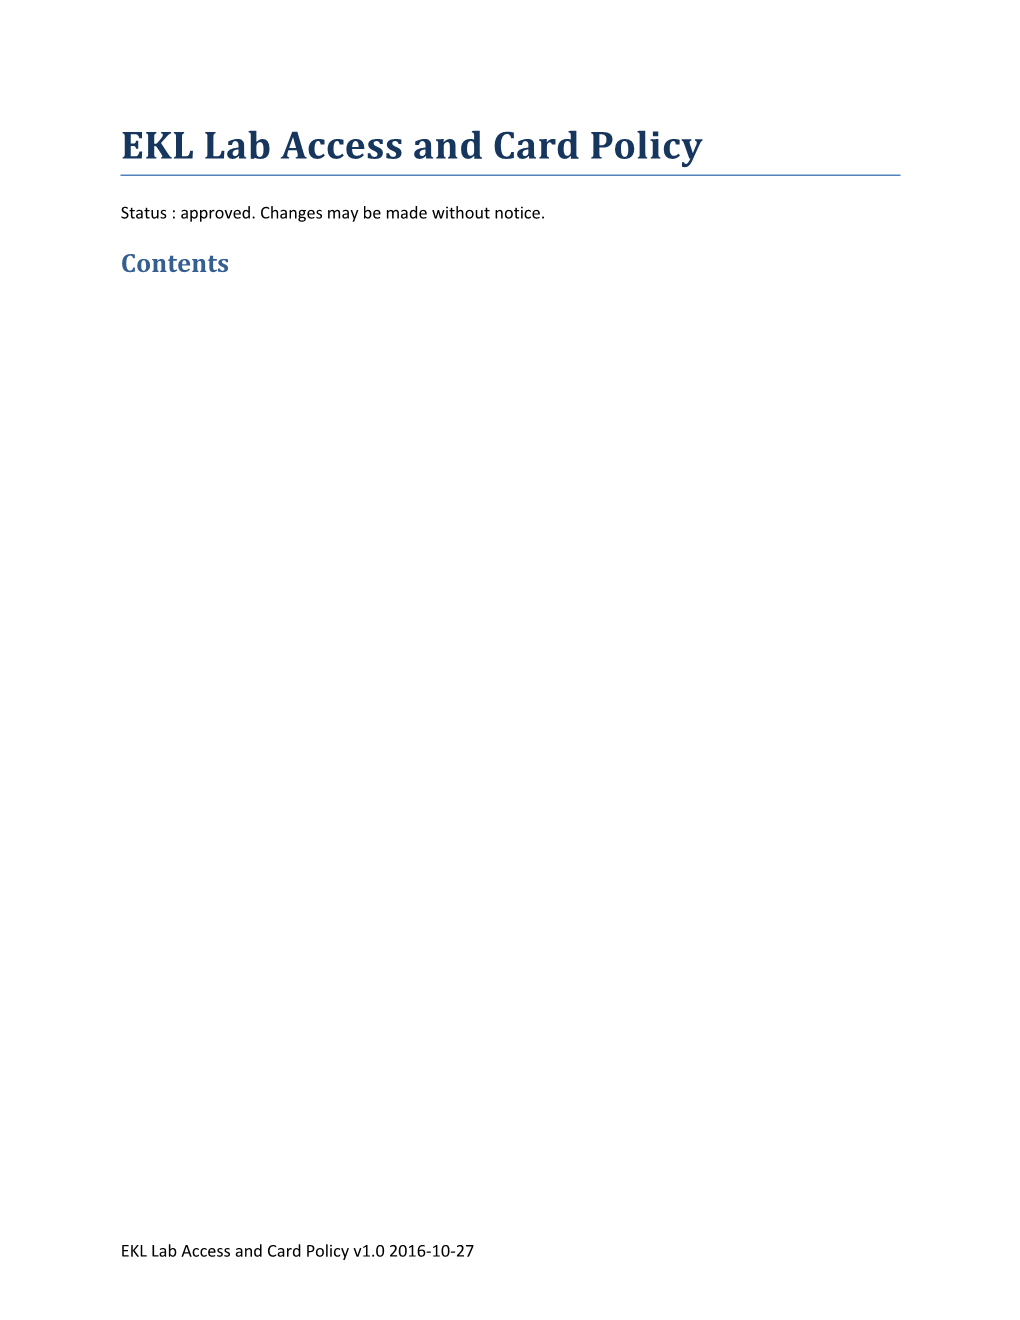 EKL Lab Accessand Card Policy